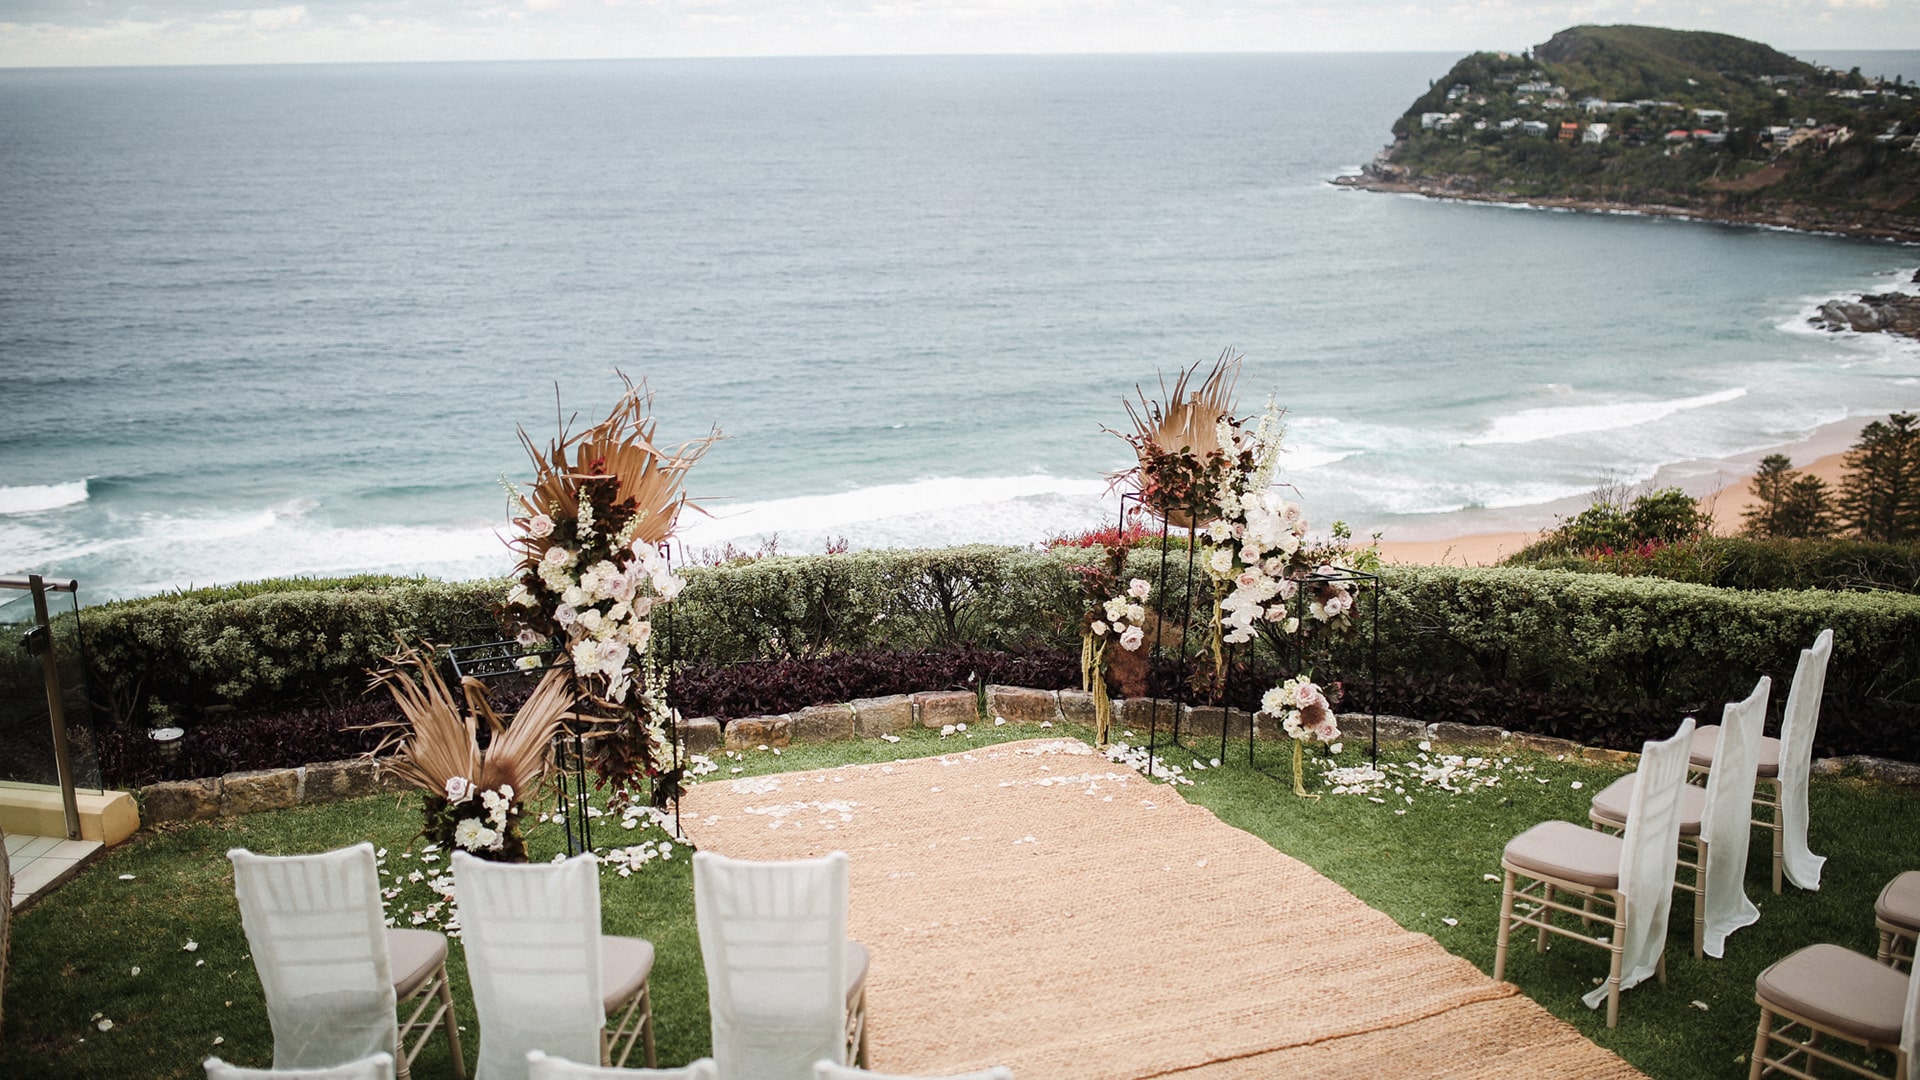 Transforming Spaces: How to Find Unique Venues on the Northern Beaches for Memorable Events